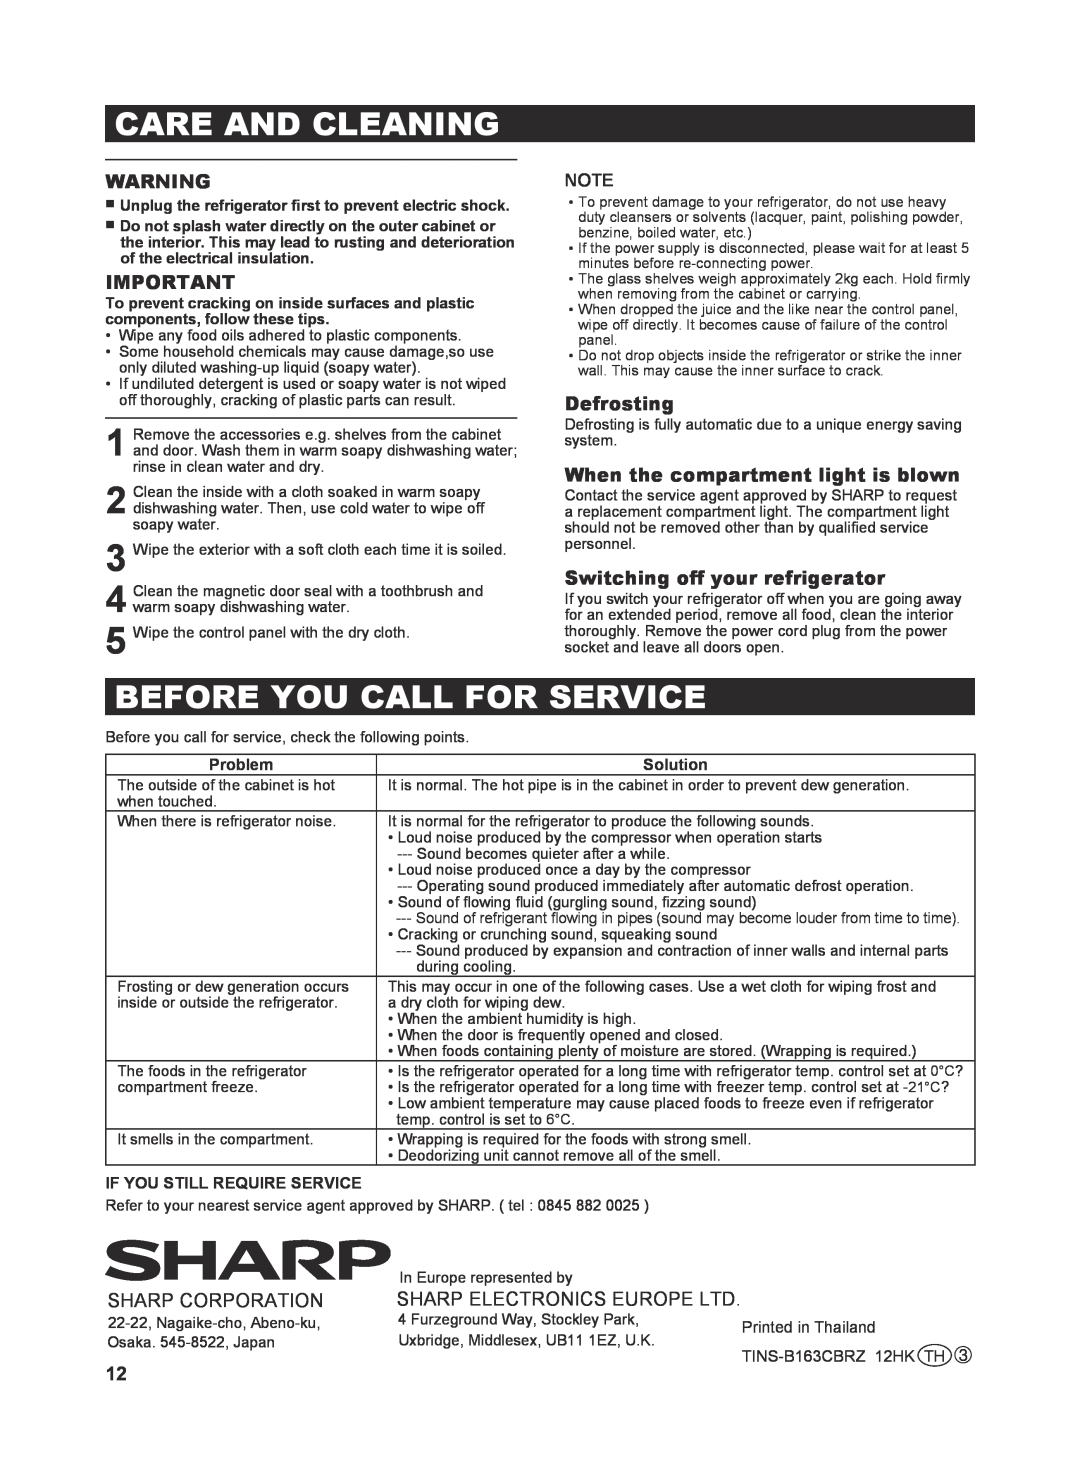 Sharp SJ-WS363T Care And Cleaning, Before You Call For Service, Defrosting, When the compartment light is blown, Problem 